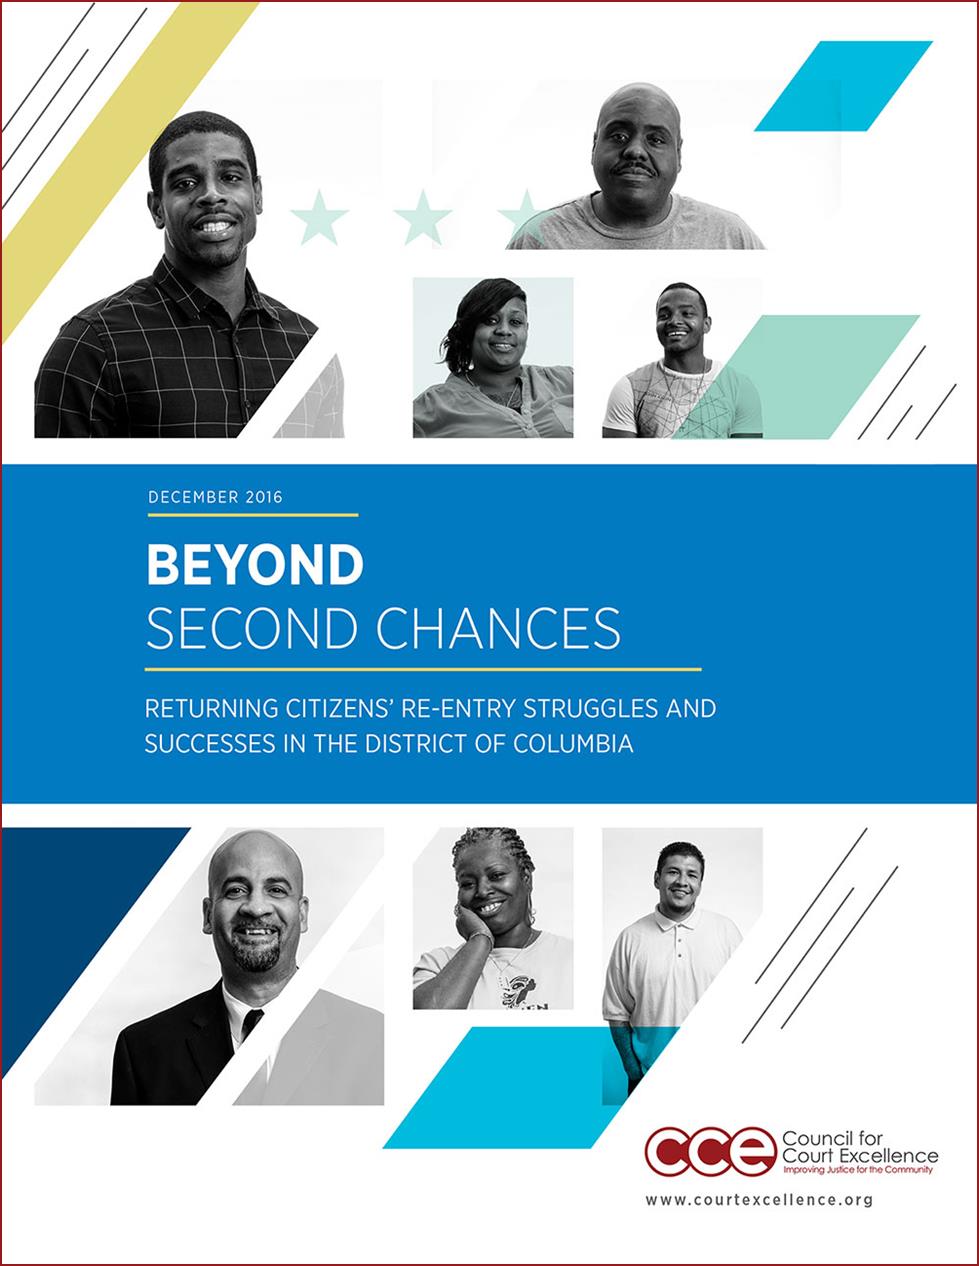 Beyond Second Chances: Returning Citizensâ€™ Re-entry Struggles and Successes in the District of Columbia